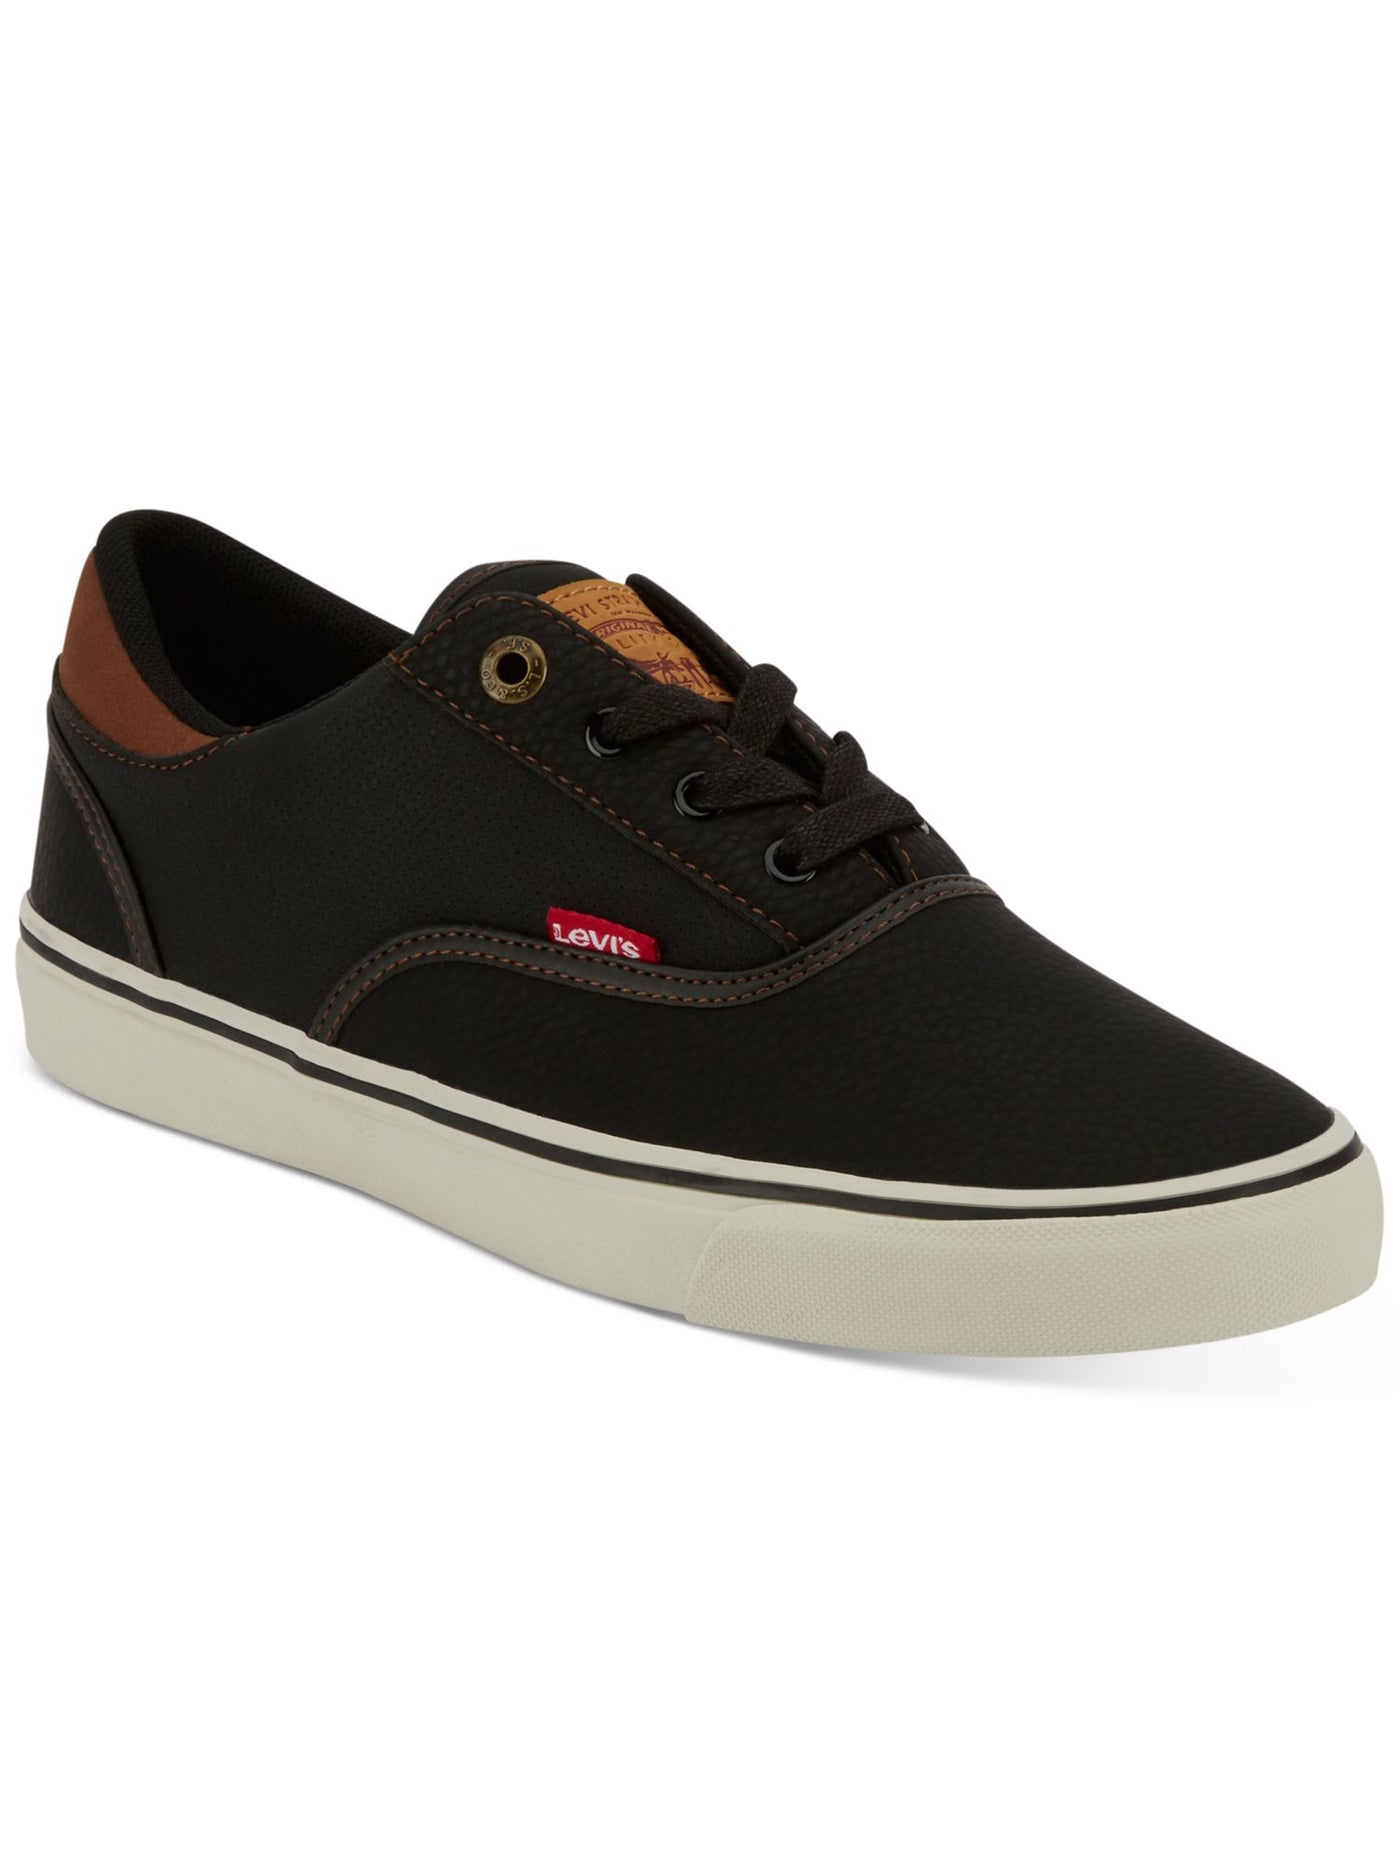 LEVI'S Mens Black Cushioned Comfort Ethan Round Toe Lace-Up Sneakers Shoes 9.5